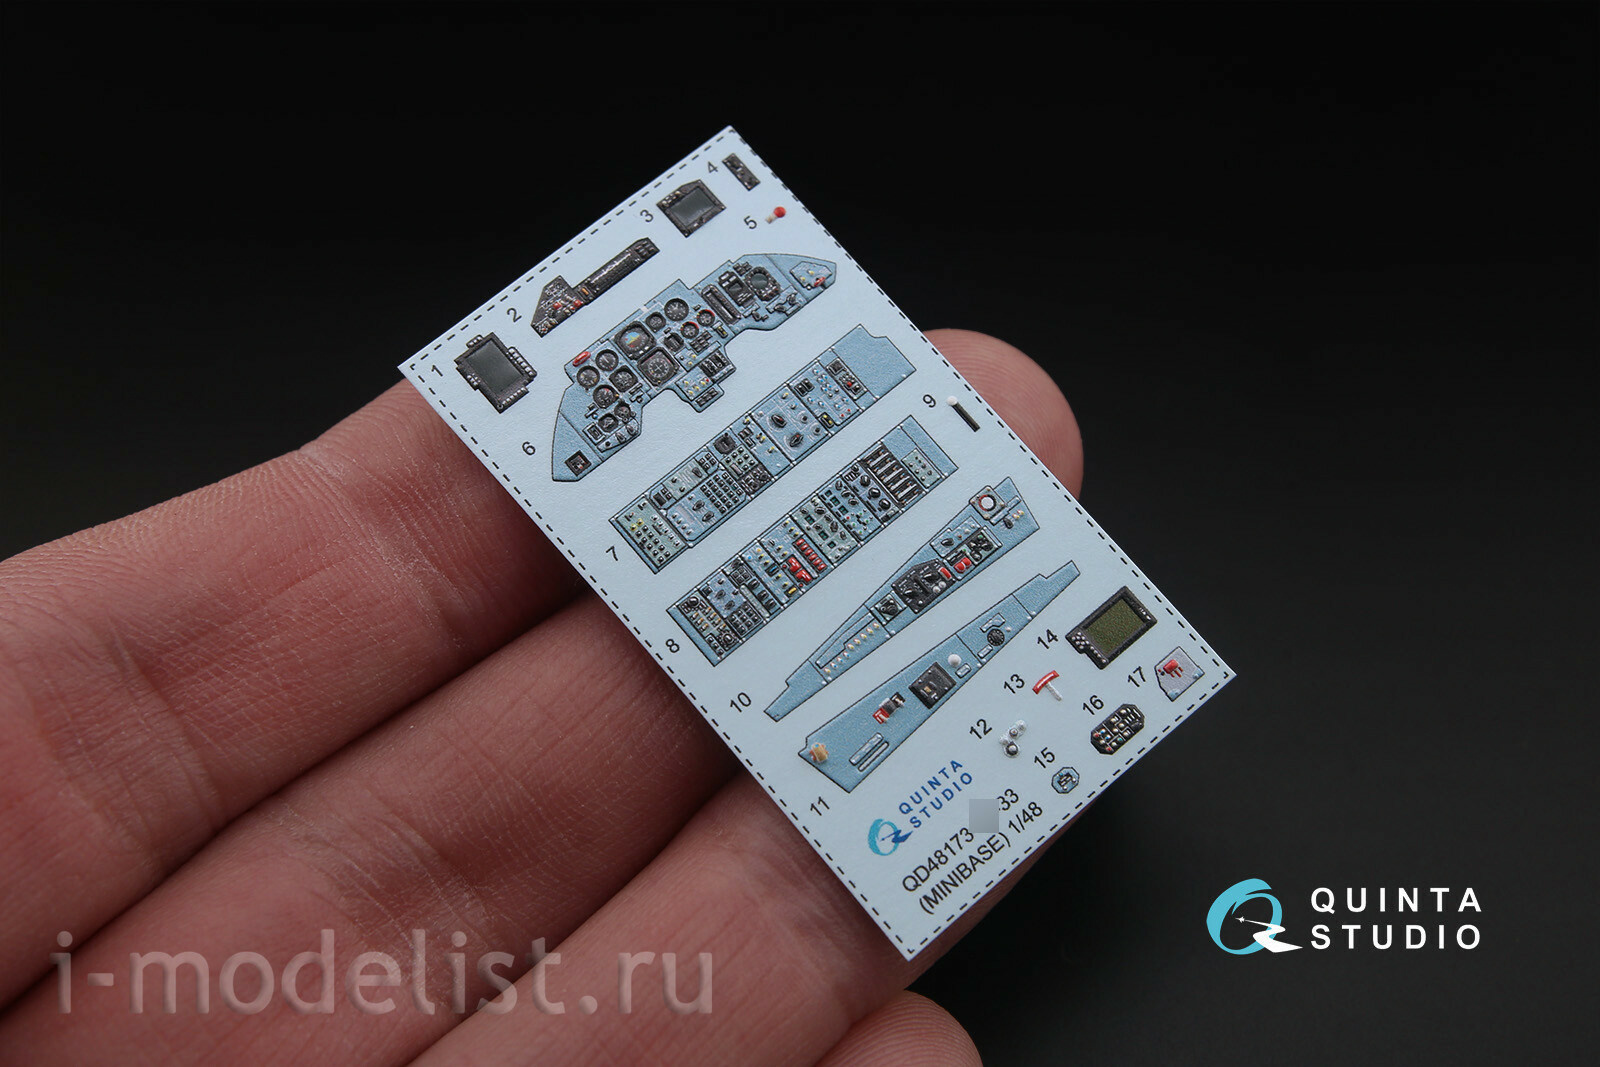 QD48173 Quinta Studio 1/48 3D Decal of the cabin interior Sukhoi-33 (for the Minibase model)